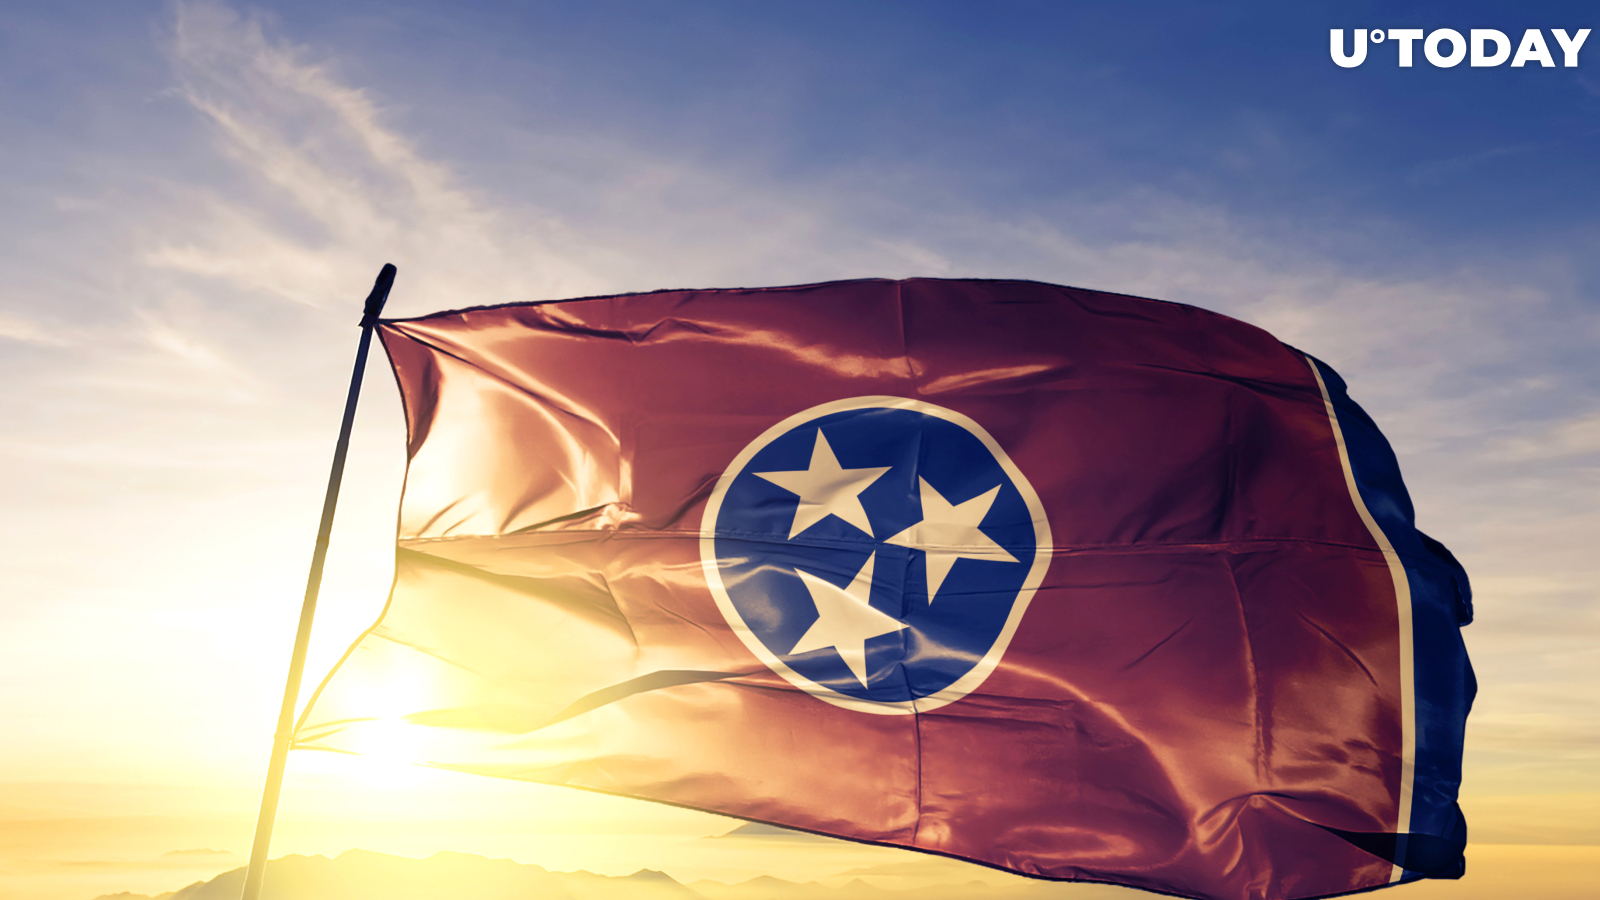 Mayor of Tennessee City Plans to Adopt Cryptocurrency